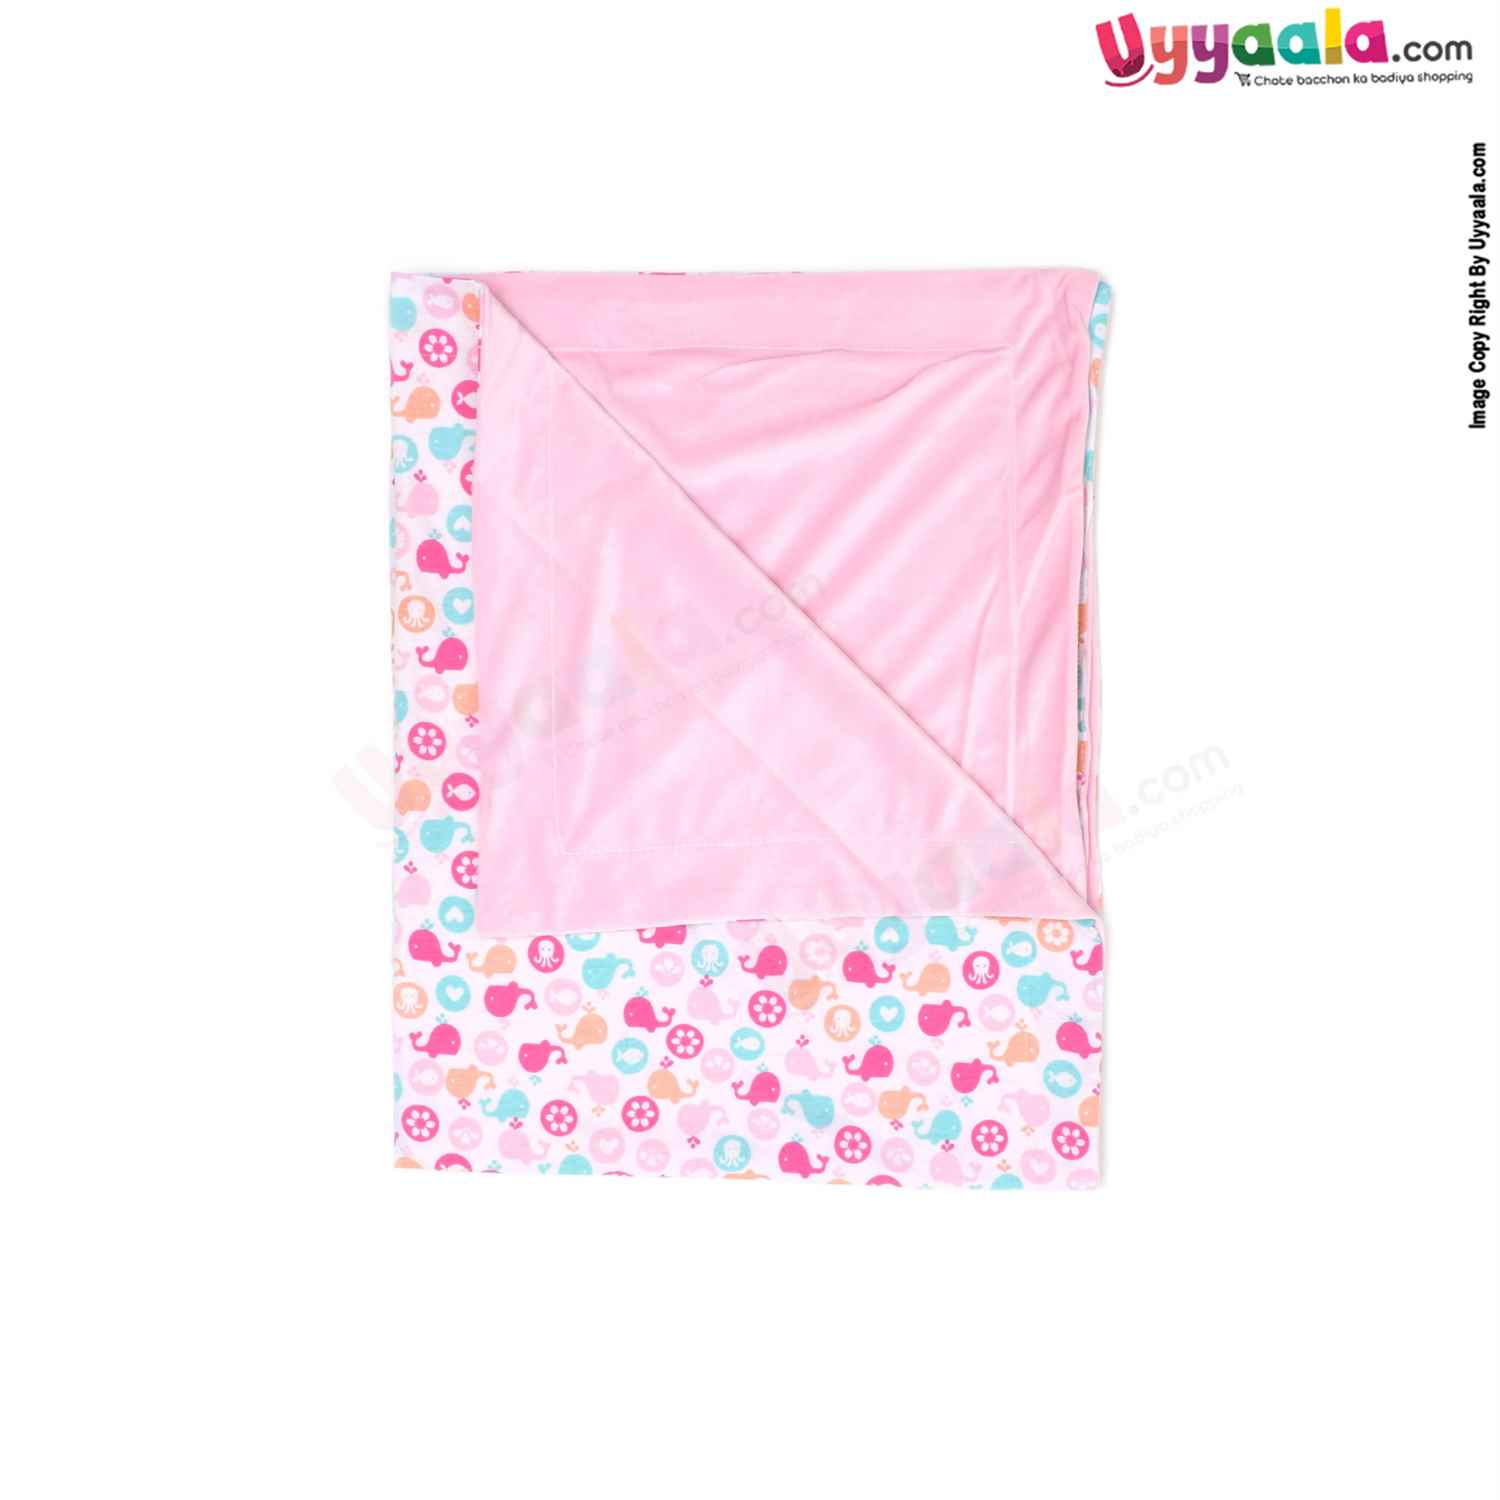 Eberry Double Layered Wrapper One Side Velvet and Another side Cotton with Sea Animals Print for Babies 0-12m Age, Size(98*76cm)- White & Pink